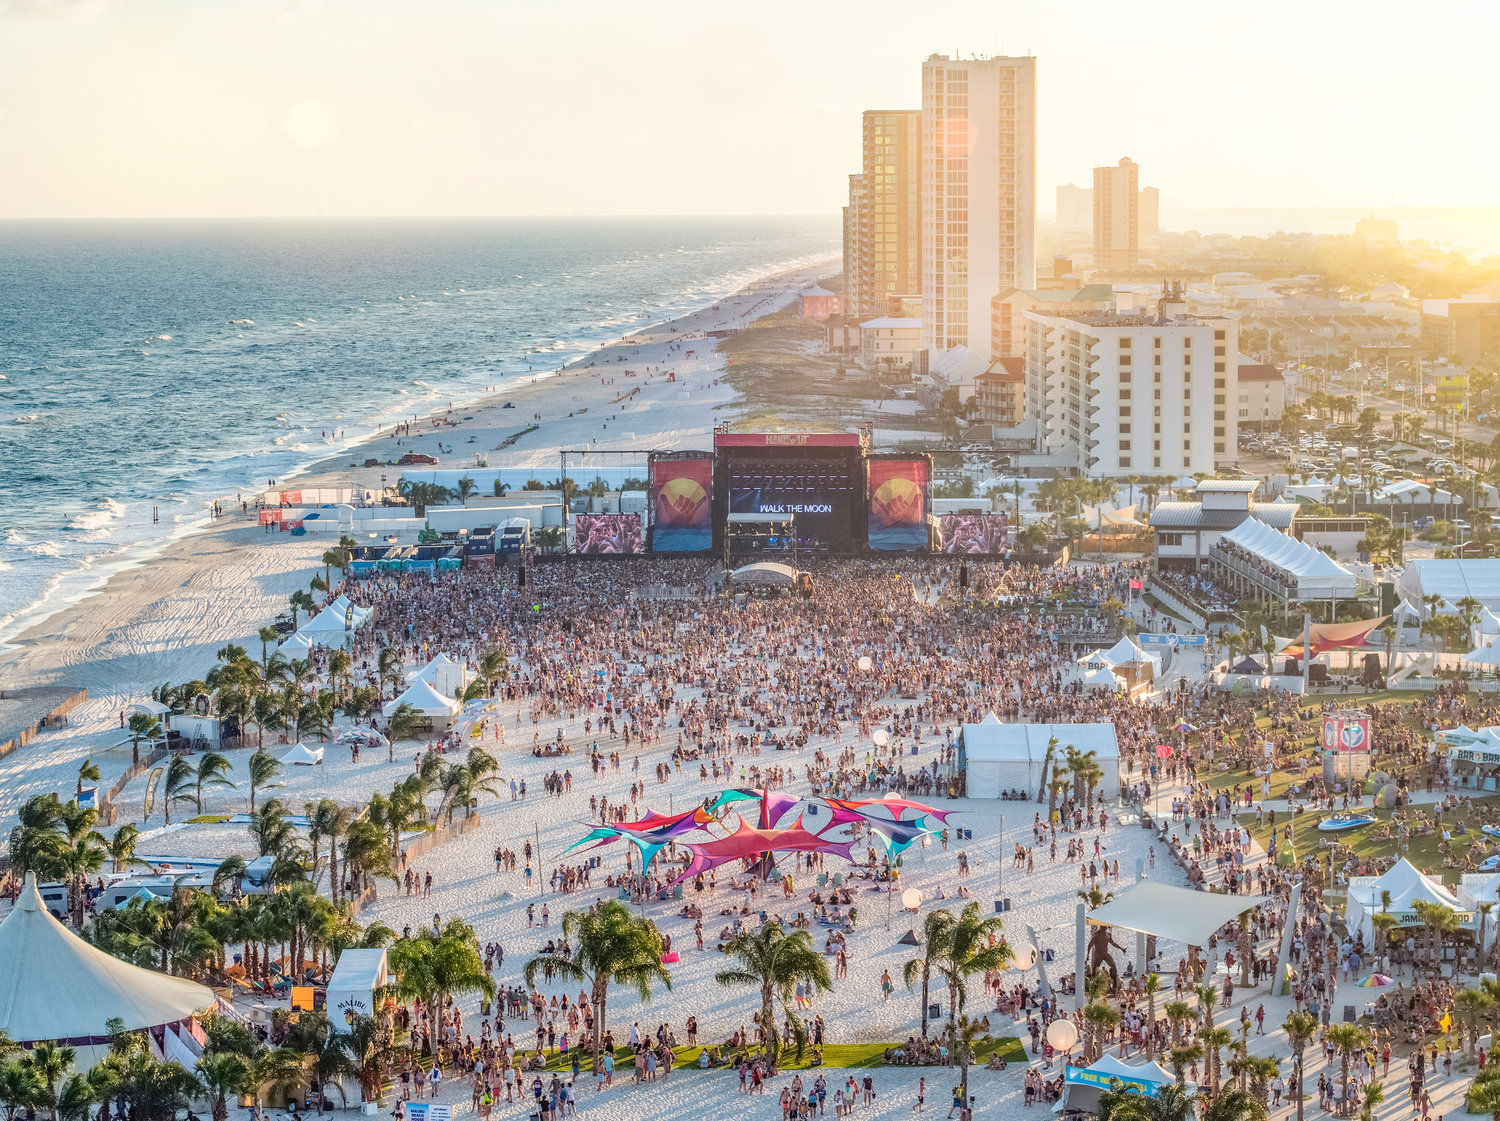 The Hangout Music Fest 2022 takes over the beaches of Gulf Shores May 20-22.